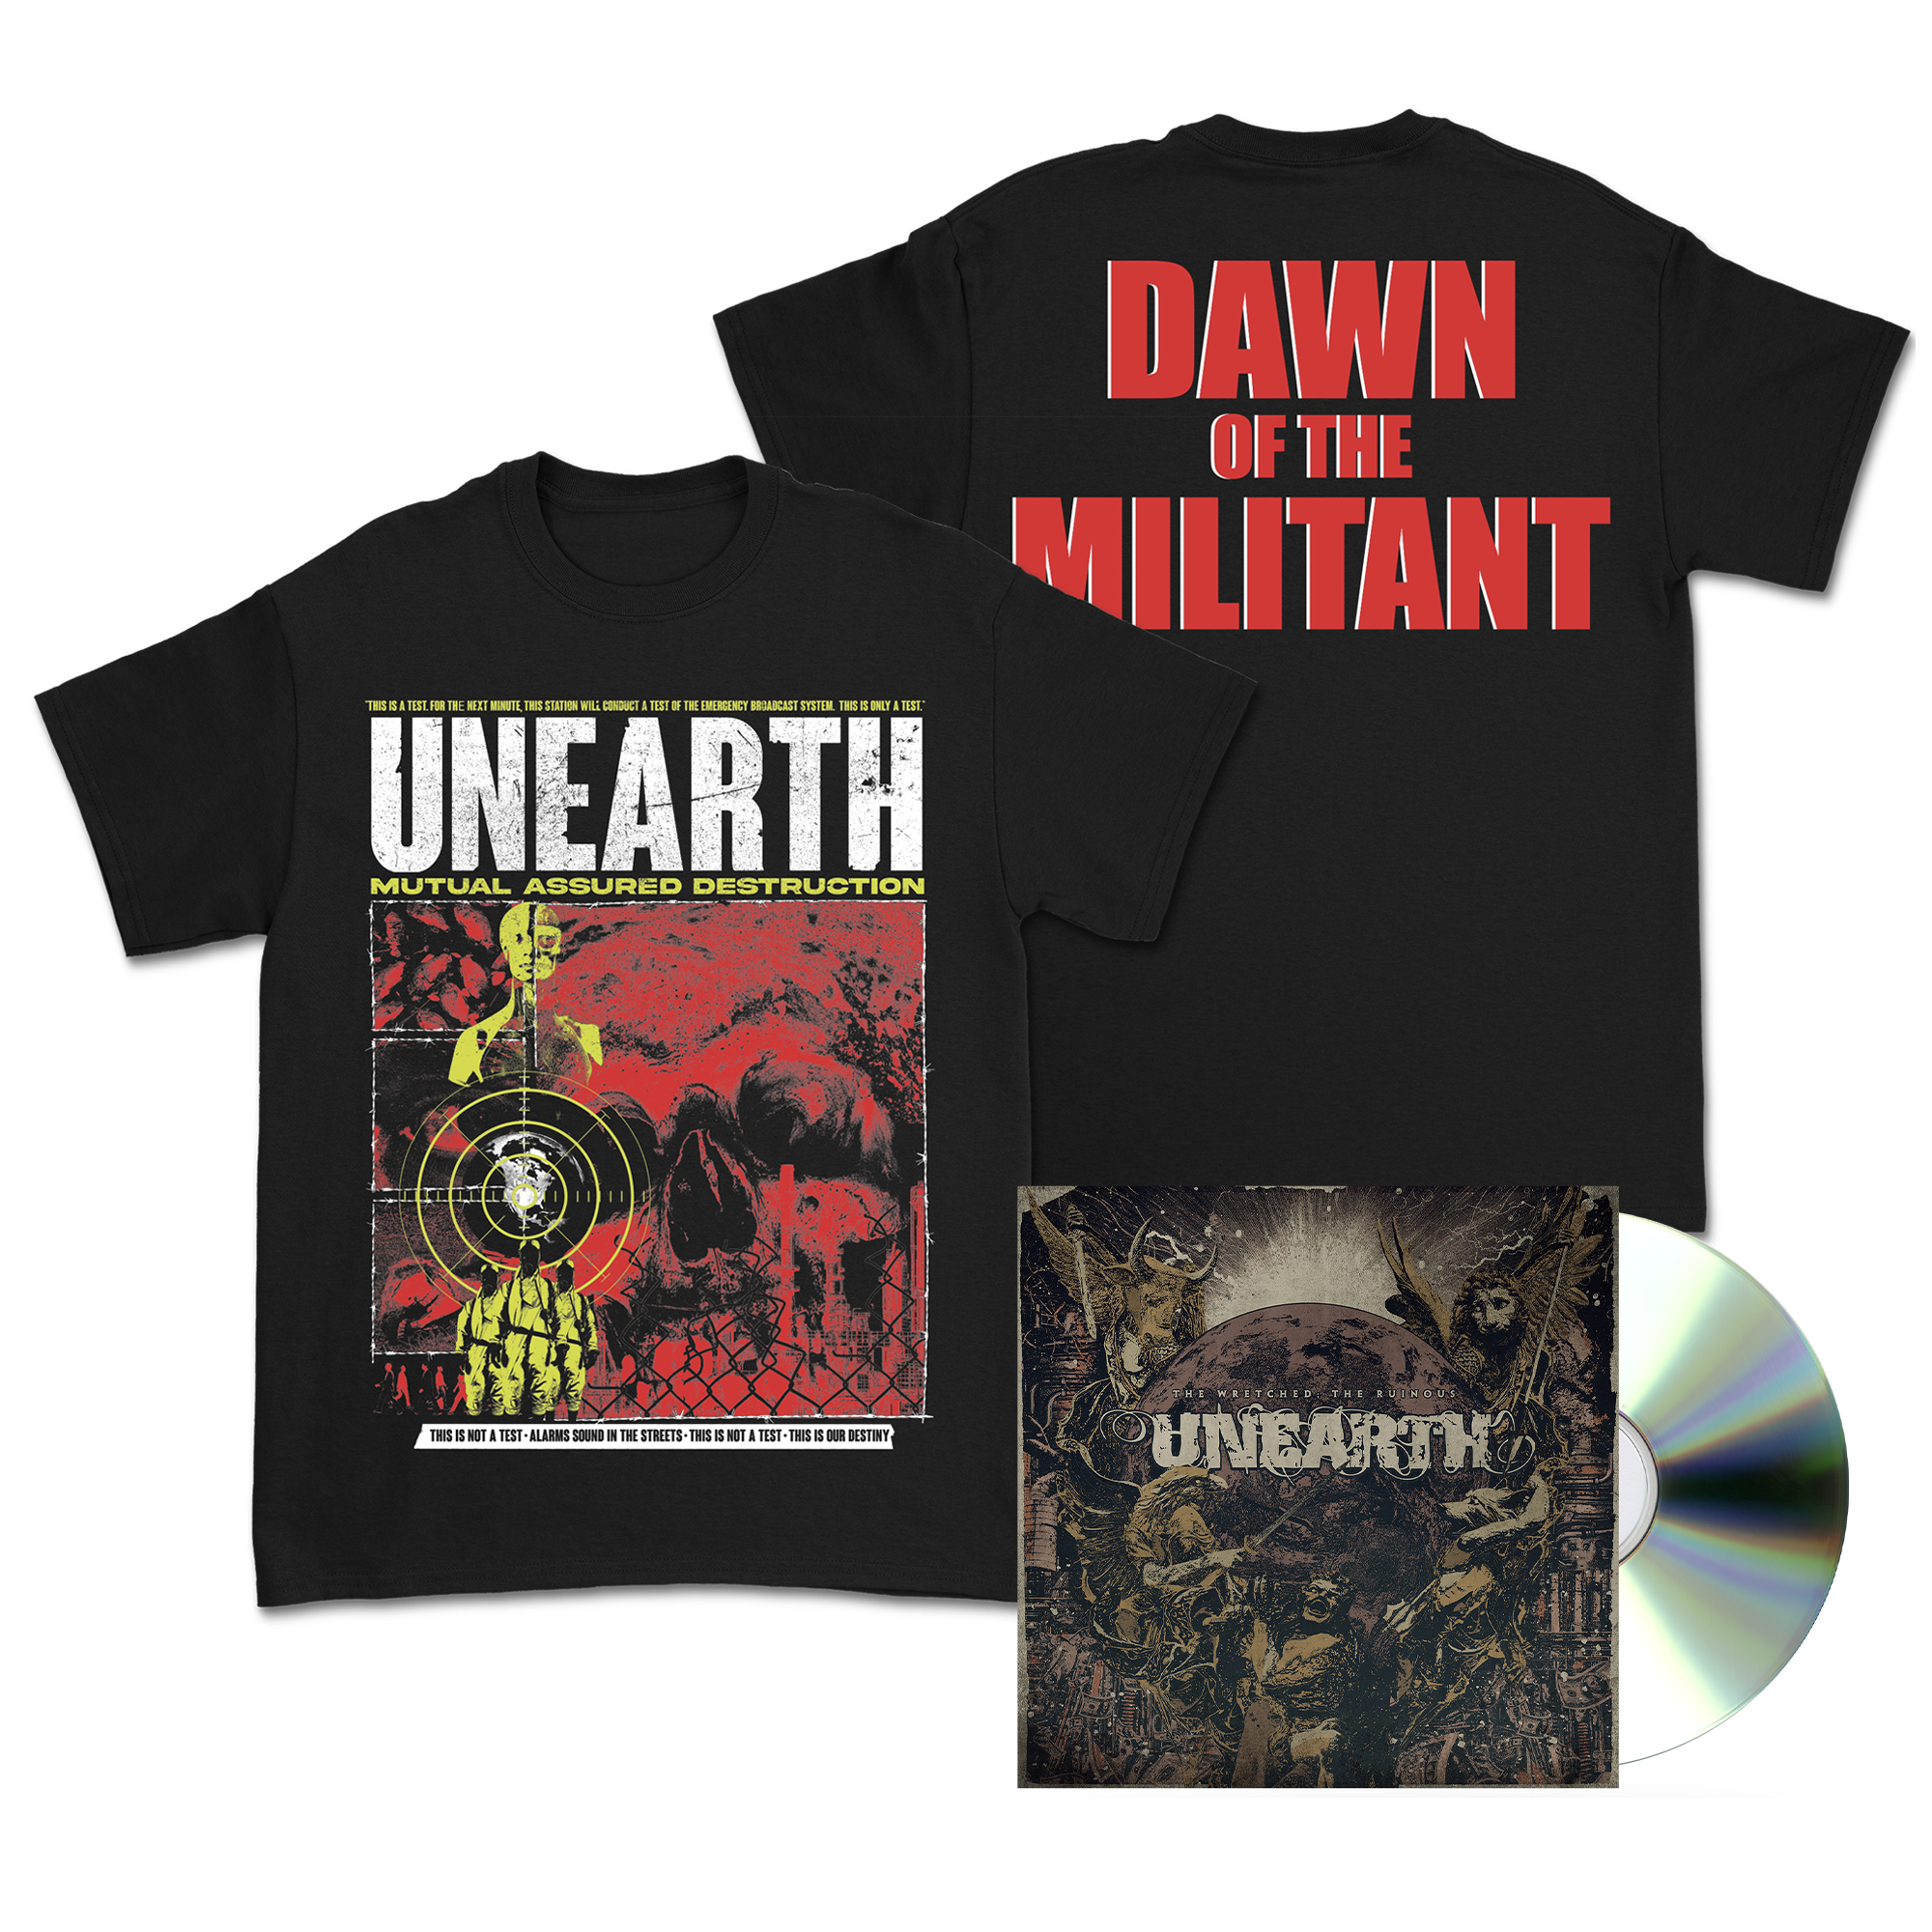 Dawn of the Militant T-Shirt + The Wretched ; The Ruinous CD Bundle